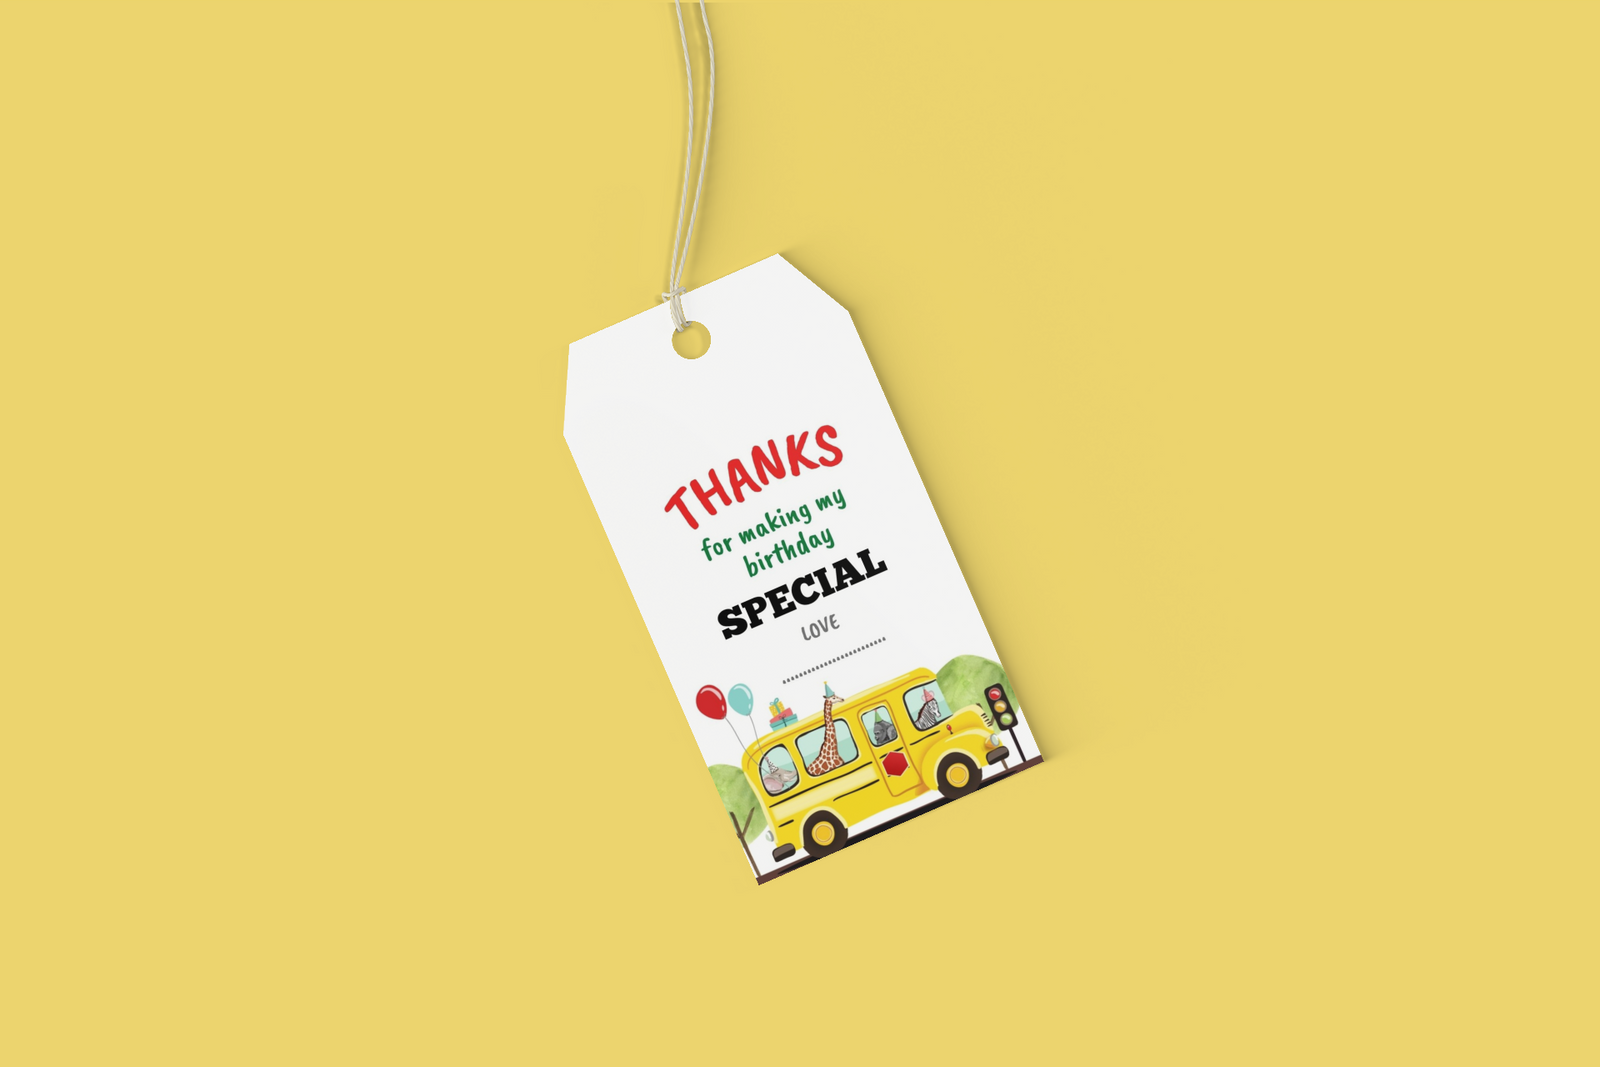 Weels On The Bus Theme Birthday Favour Tags (2 x 3.5 inches/250 GSM Cardstock/Mixcolour/30Pcs)